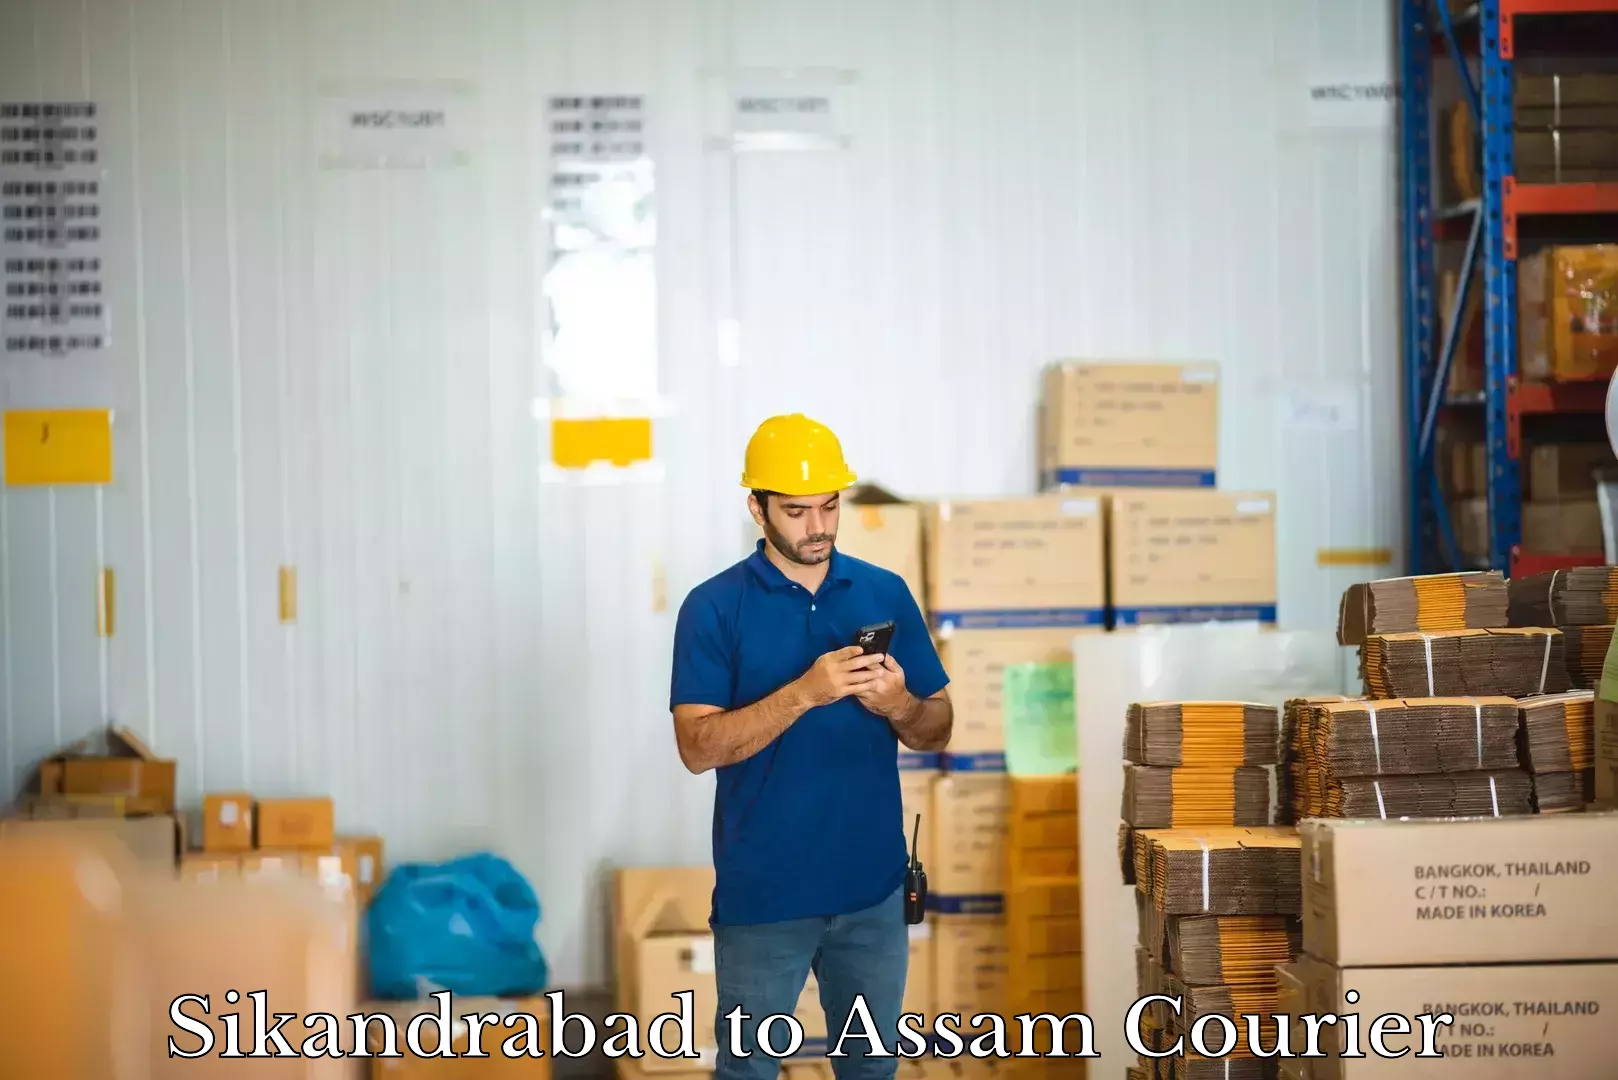 Instant baggage transport quote Sikandrabad to Assam